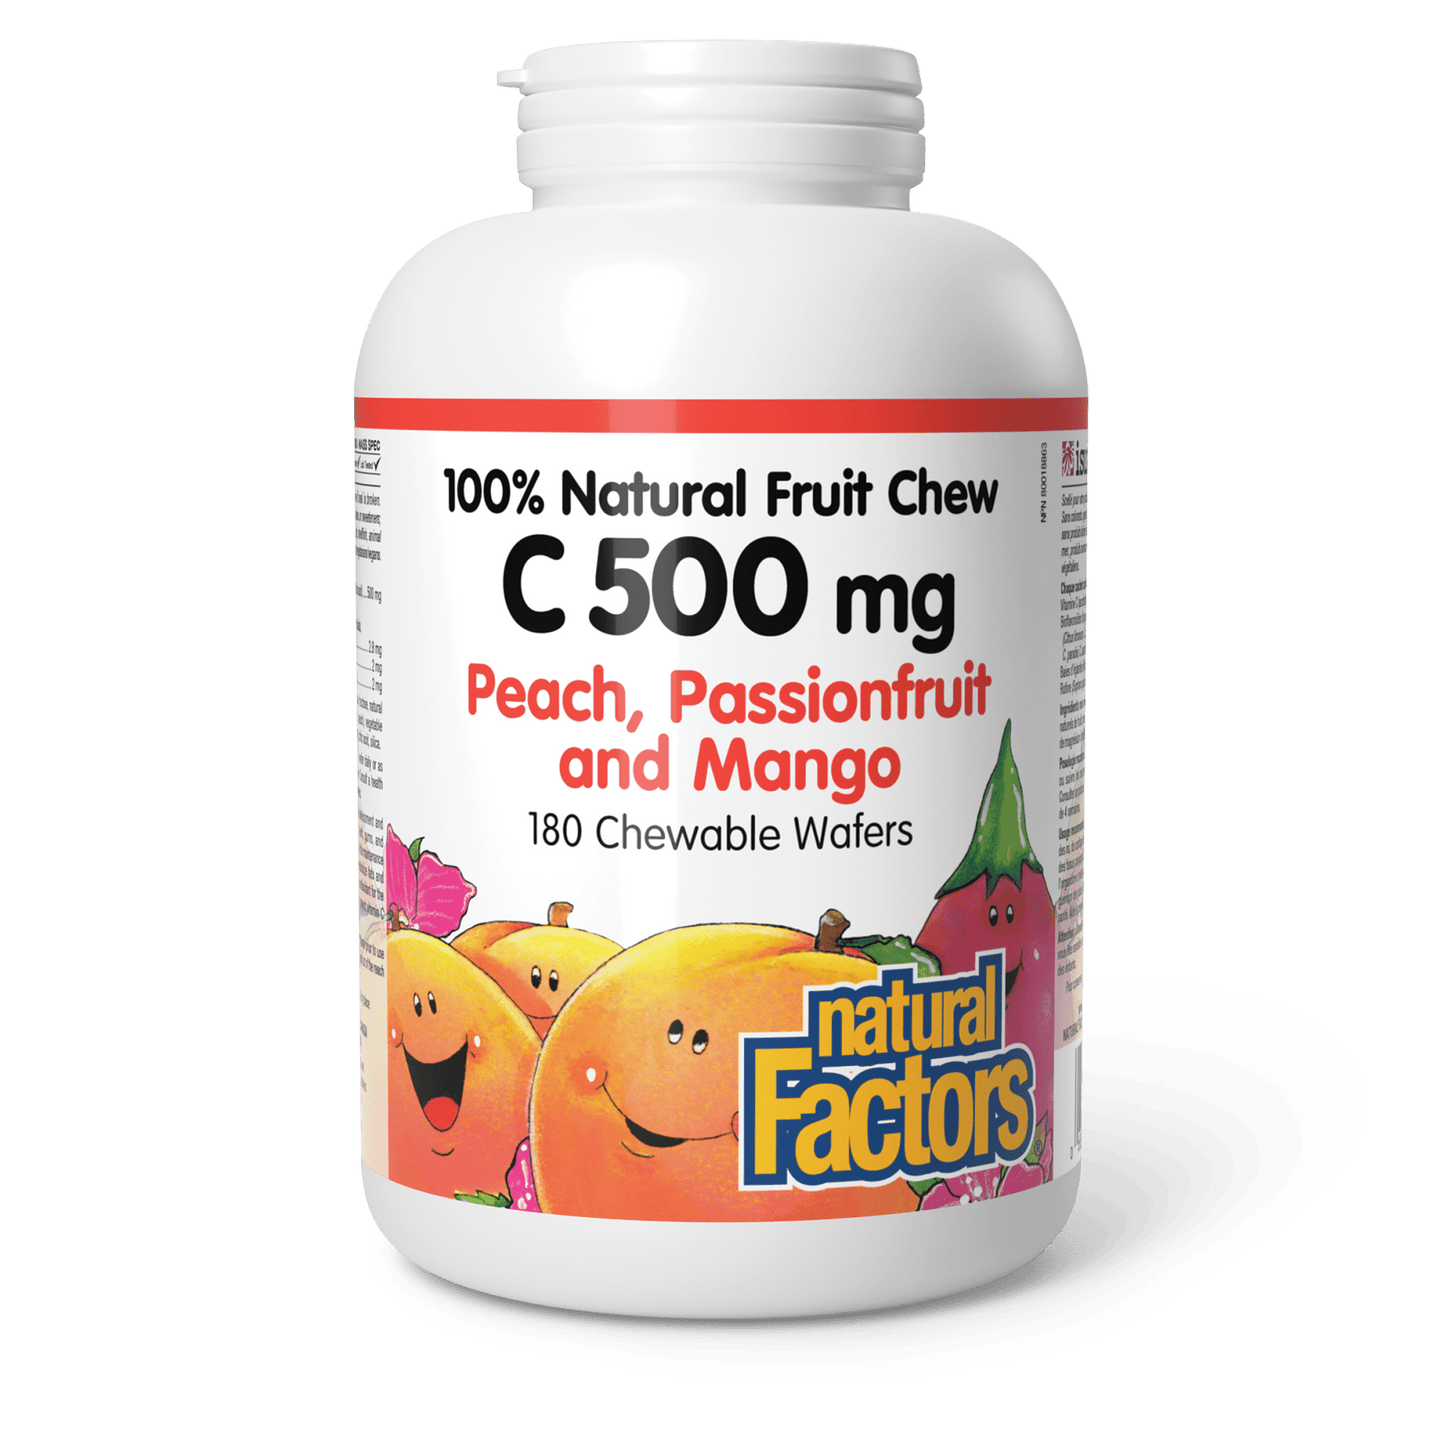 C 500 mg 100% Natural Fruit Chew, Peach, Passionfruit, and Mango, Natural Factors|v|image|1325